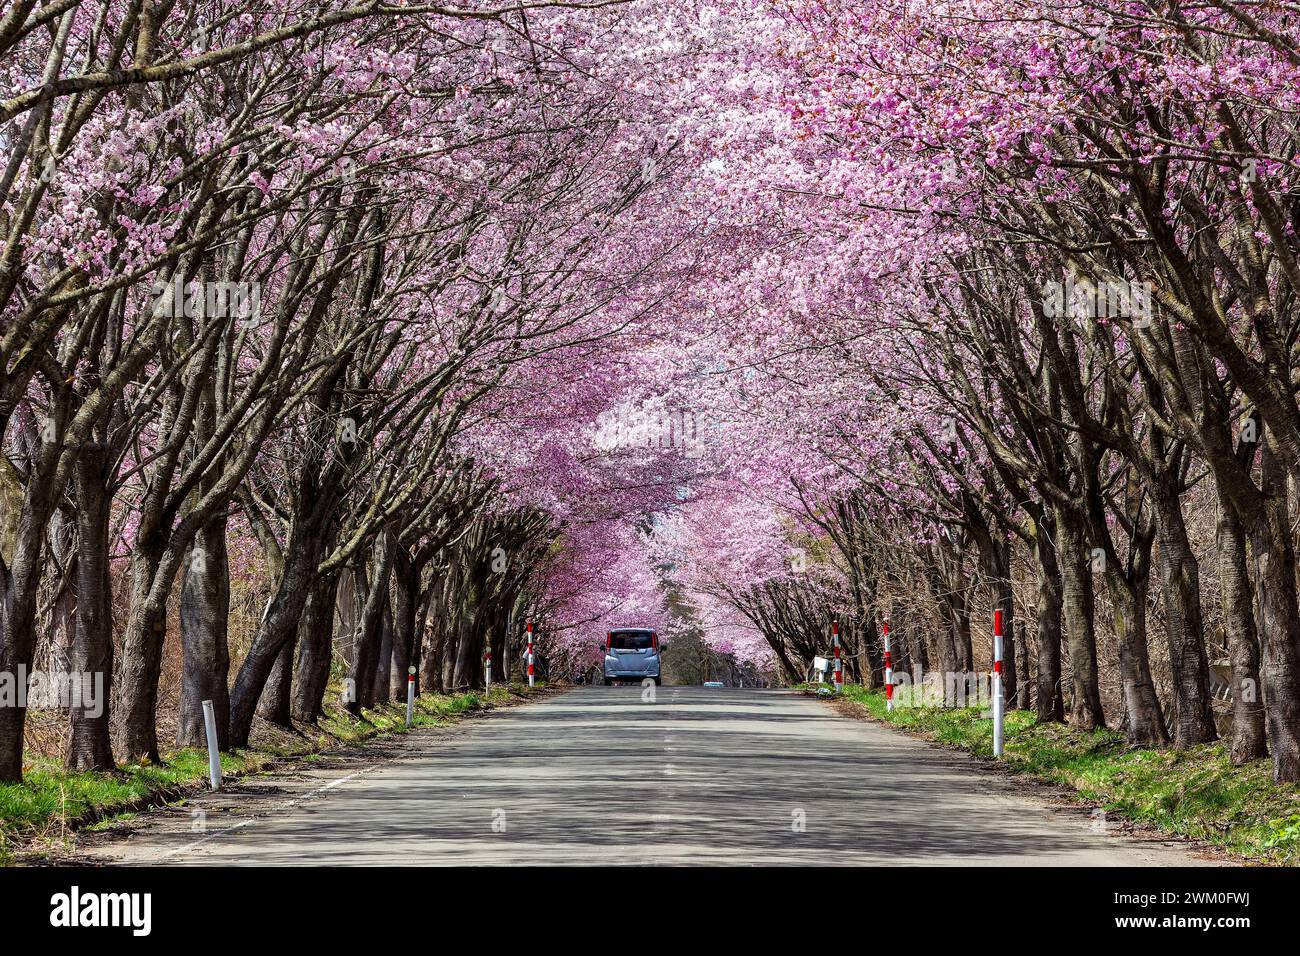 Rural traffic passing under a beautiful Cherry Blossom tunnel on a road in Aomori Prefecture, Japan Stock Photo